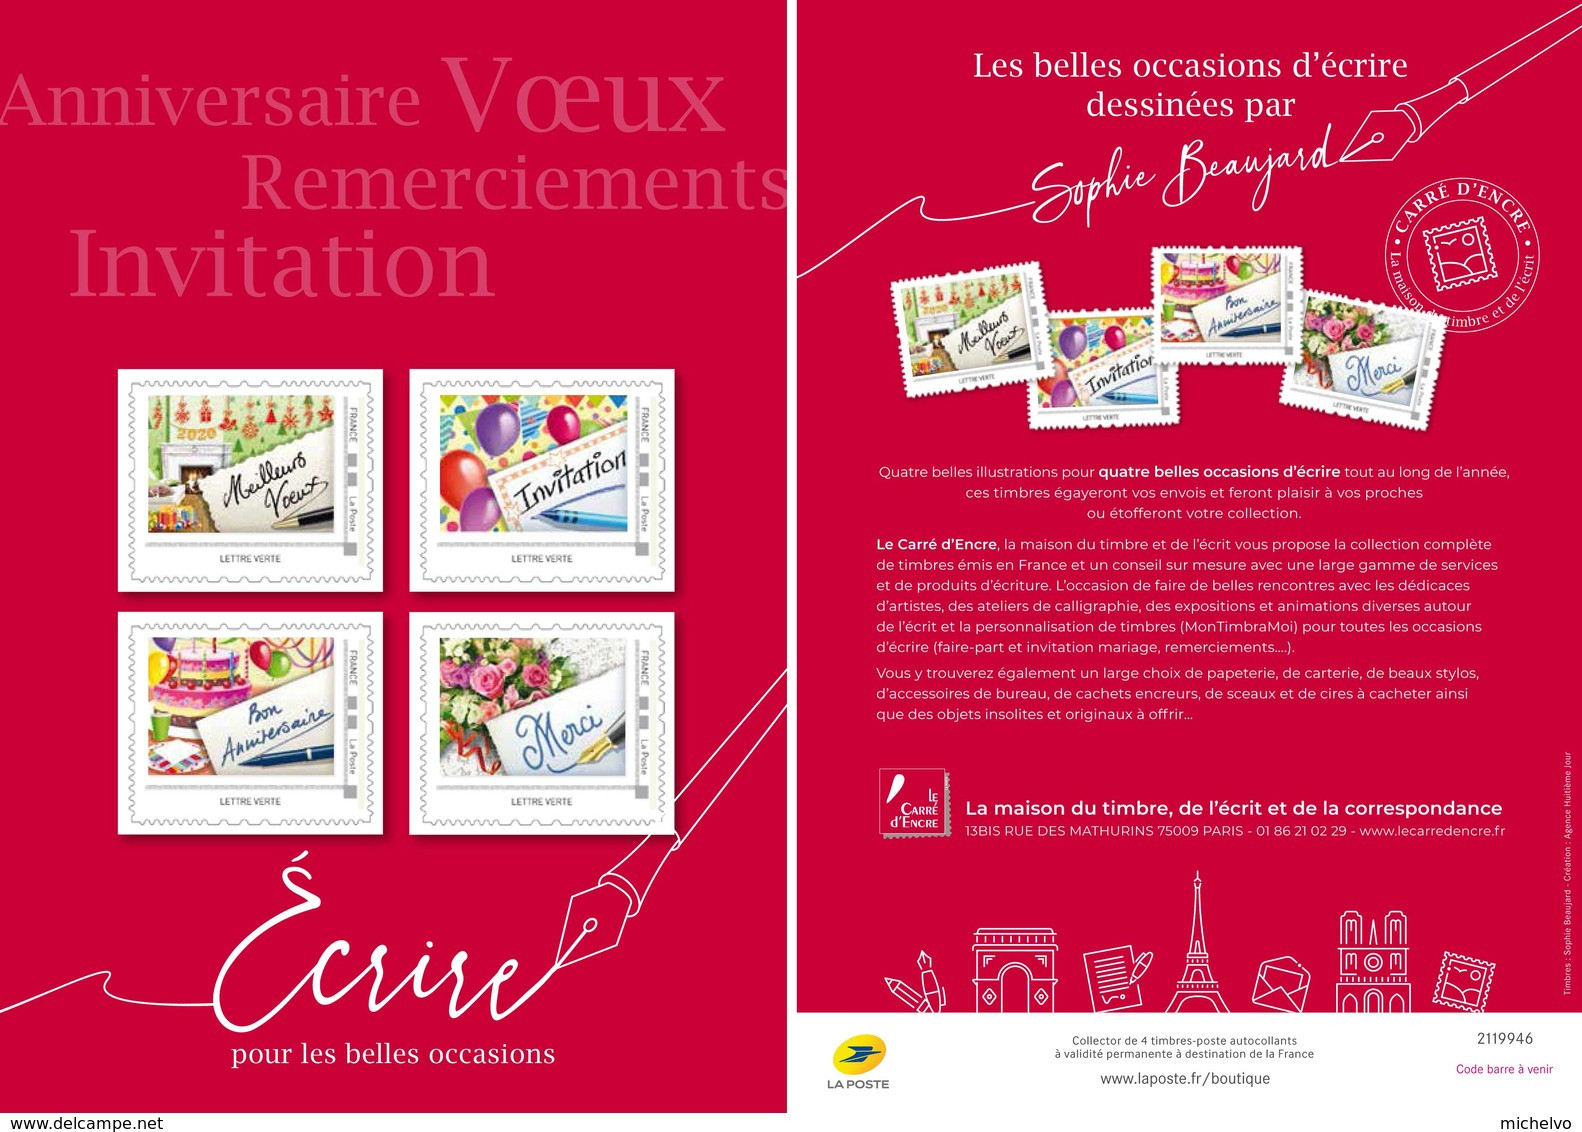 France 2019 - Collector - Anniversaire Voeux Remerciement Invitation (Sophie Beaujard) ** - Unused Stamps